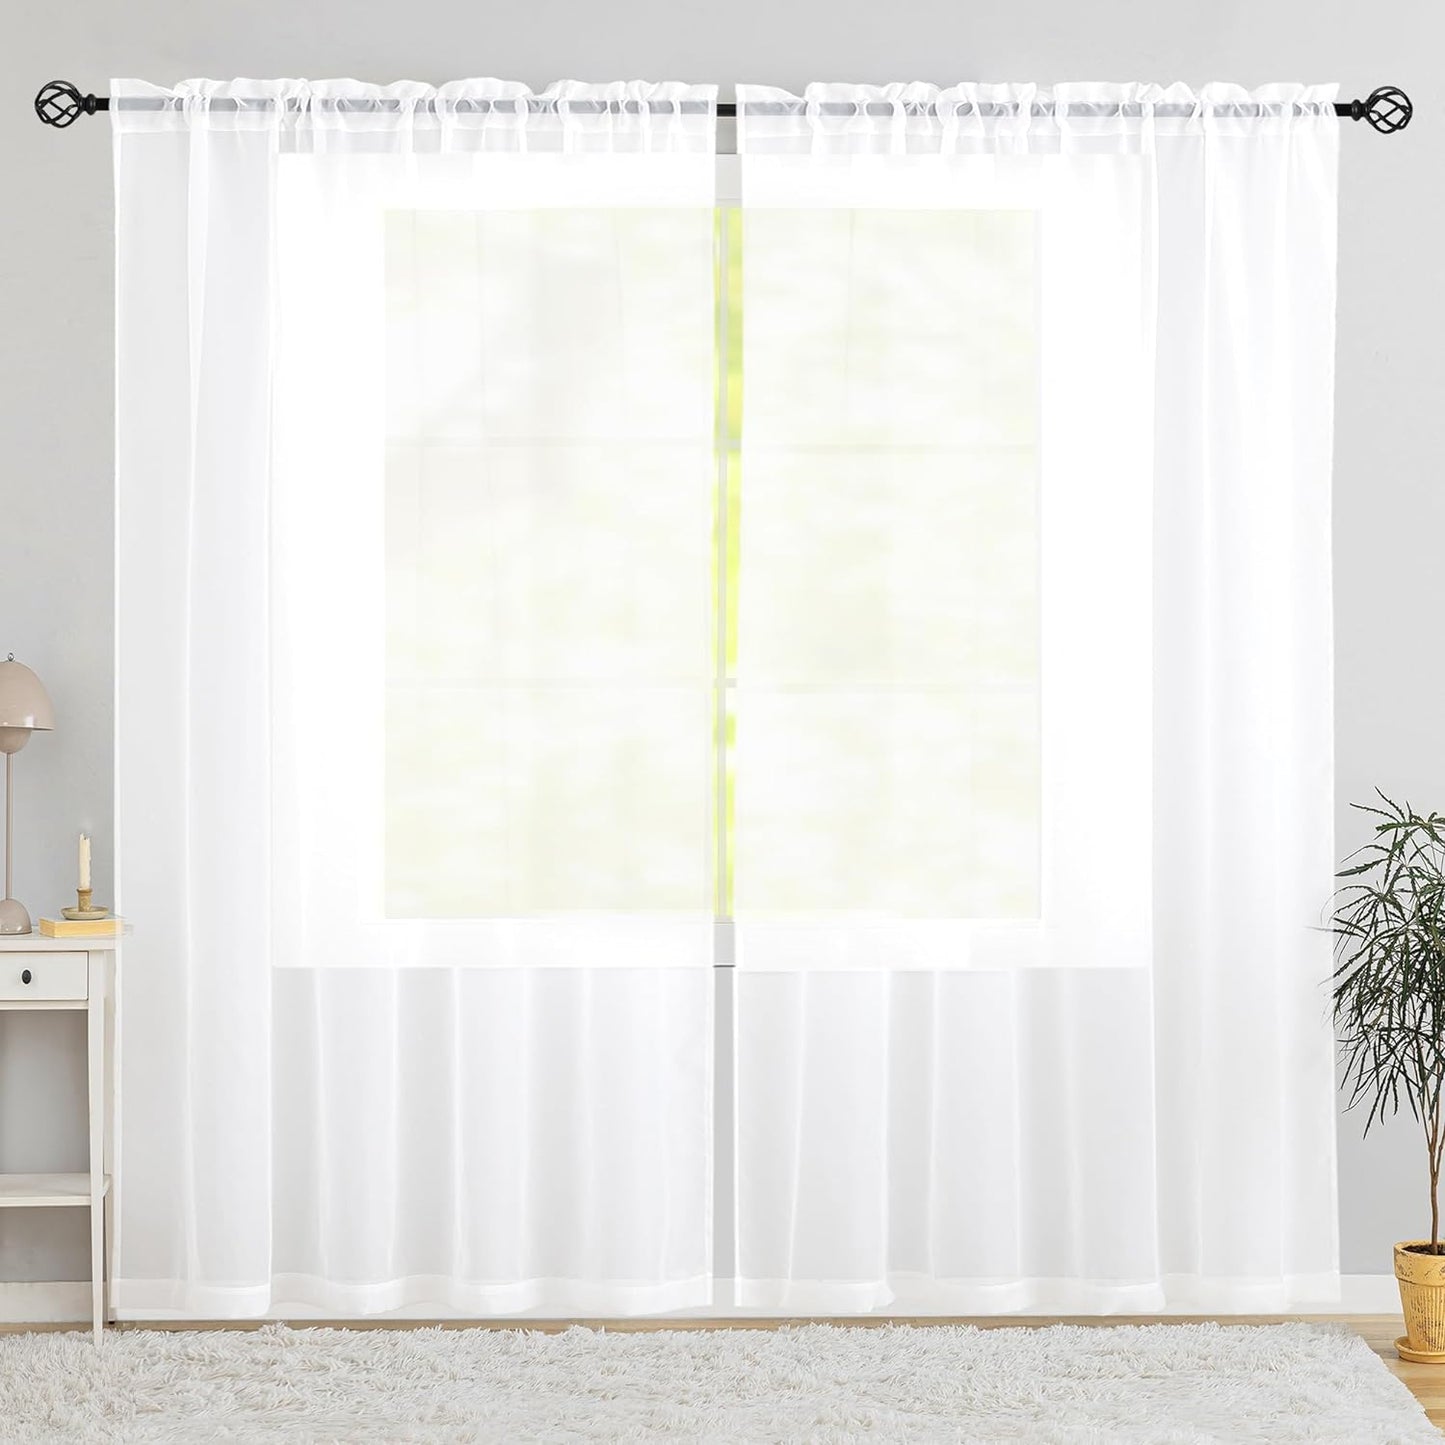 Semi Voile White Sheer Curtains 84 Inches Long 2 Panels Rod Pocket Window Treatment for Living Room Bedroom Dining Room(White 52" W X 84" L)  Karseteli White 70"W X 108"L 